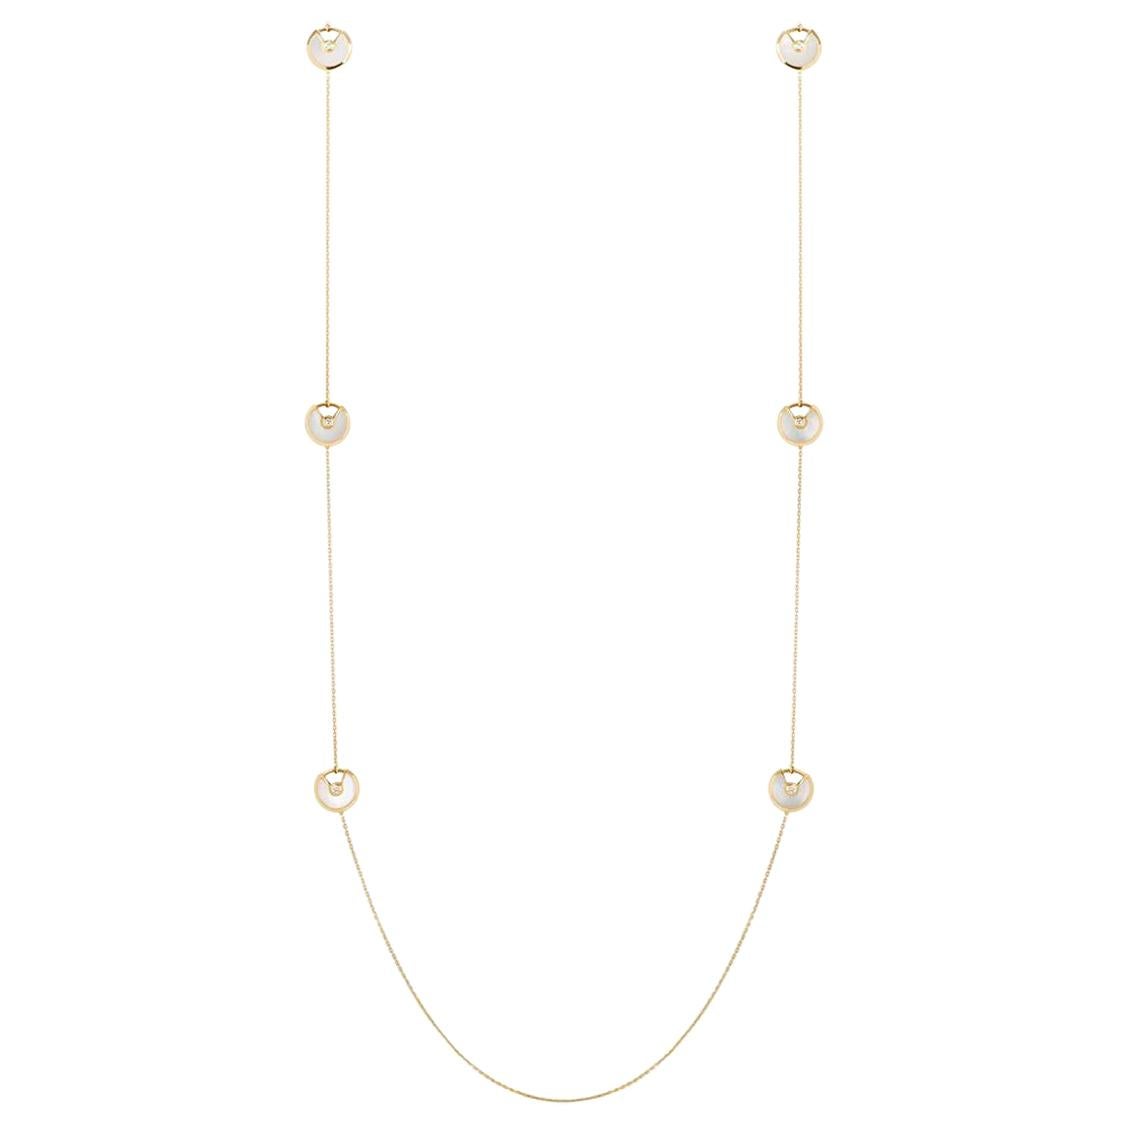 A beautiful 18k yellow gold necklace from the Amulette de Cartier collection. The necklace has 6 circular talisman motifs, each with a mother of pearl inlay and a single round brilliant cut diamond set to the centre. The necklace measures